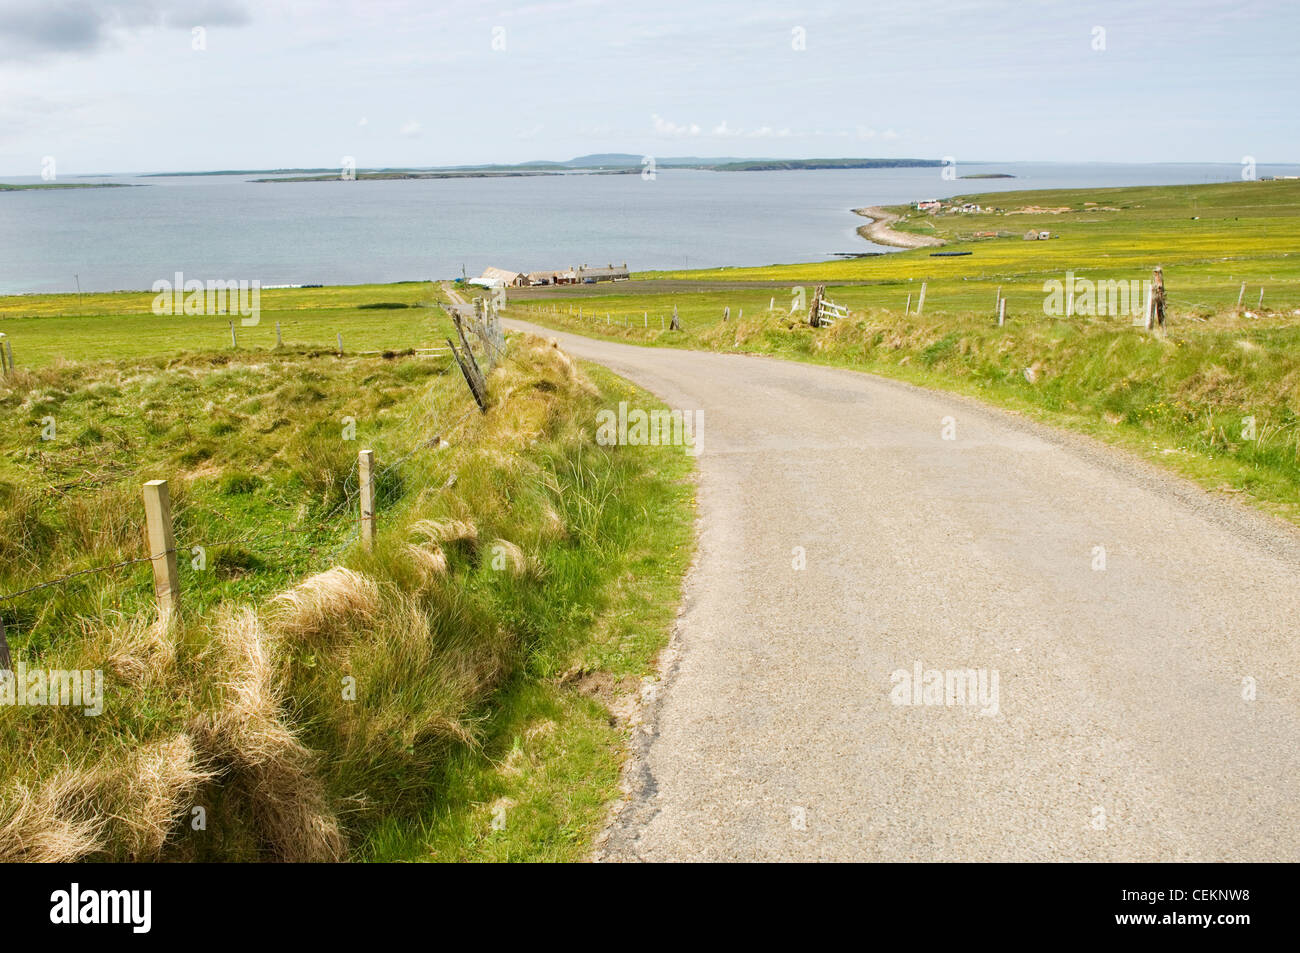 Crofting landscape on the west side of the island of Eday, Orkney Islands, Scotland. Stock Photo